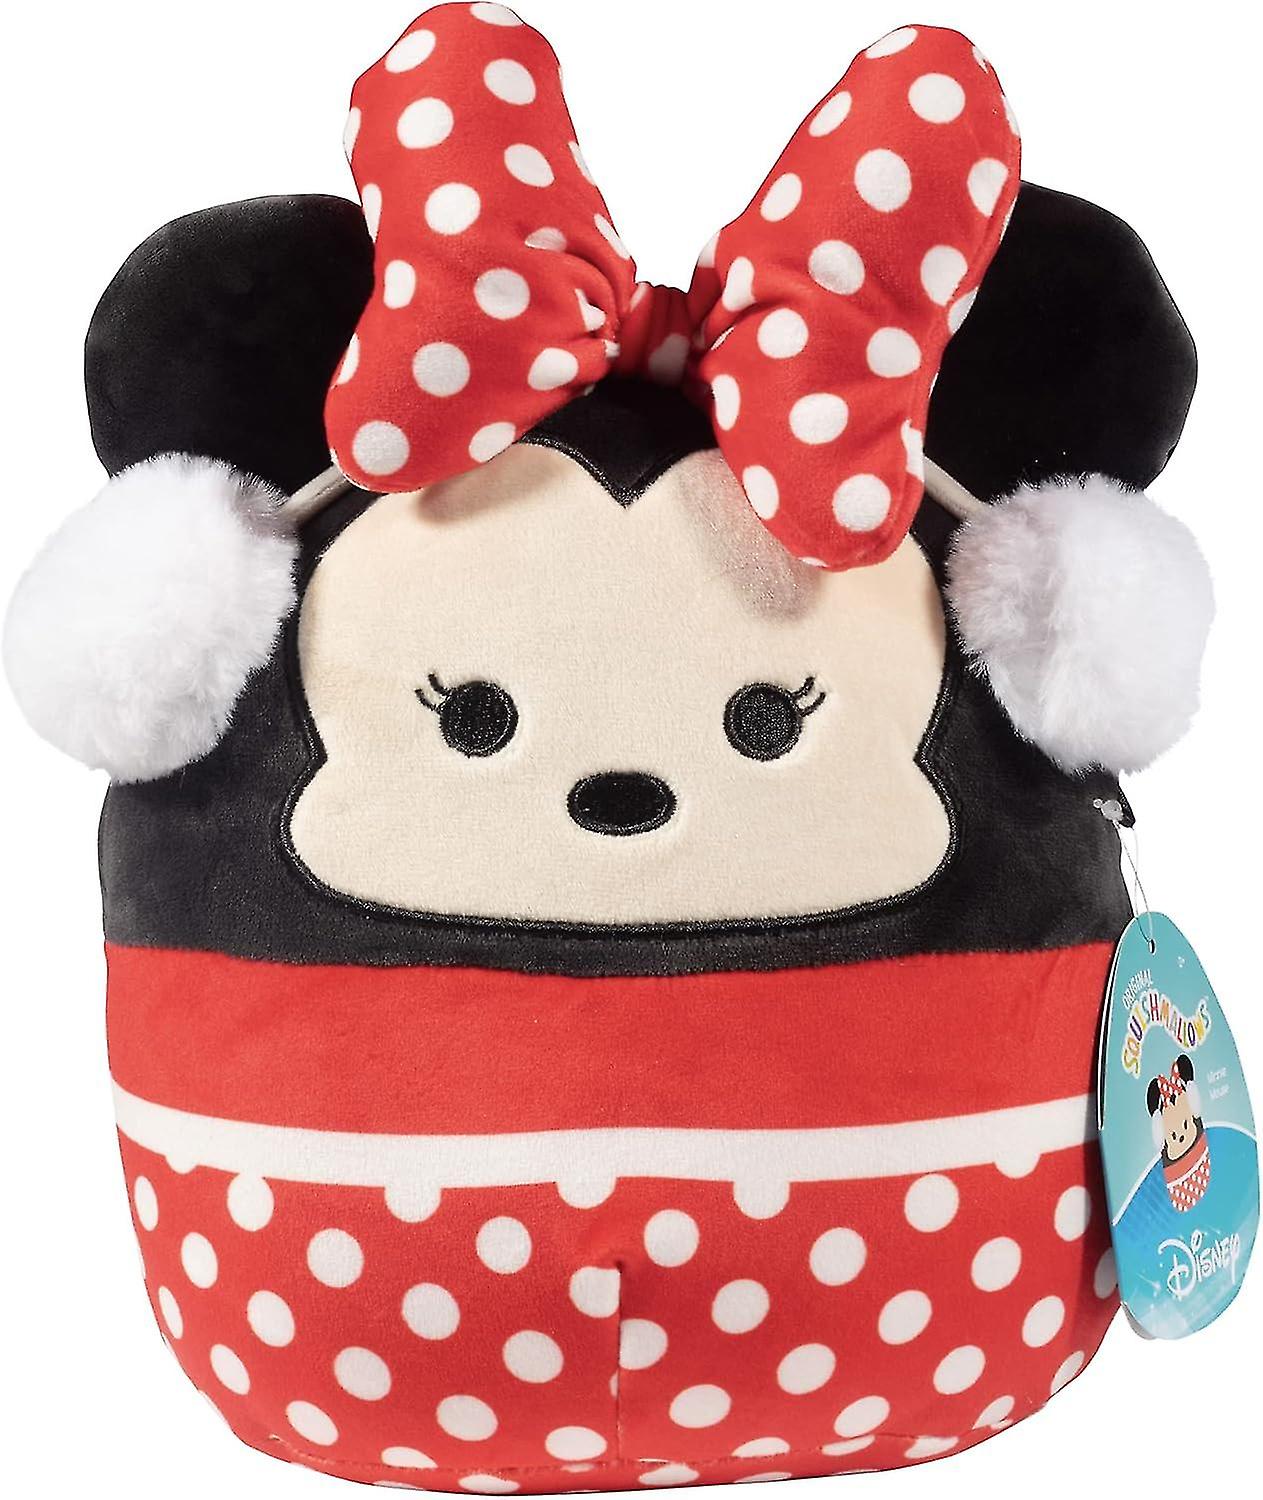 Squishmallow 10 Minnie Mouse - Official Kellytoy Christmas Plush - Collectible Soft and Squishy Holiday Disney Stuffed Animal Toy - Add To Your Squad -